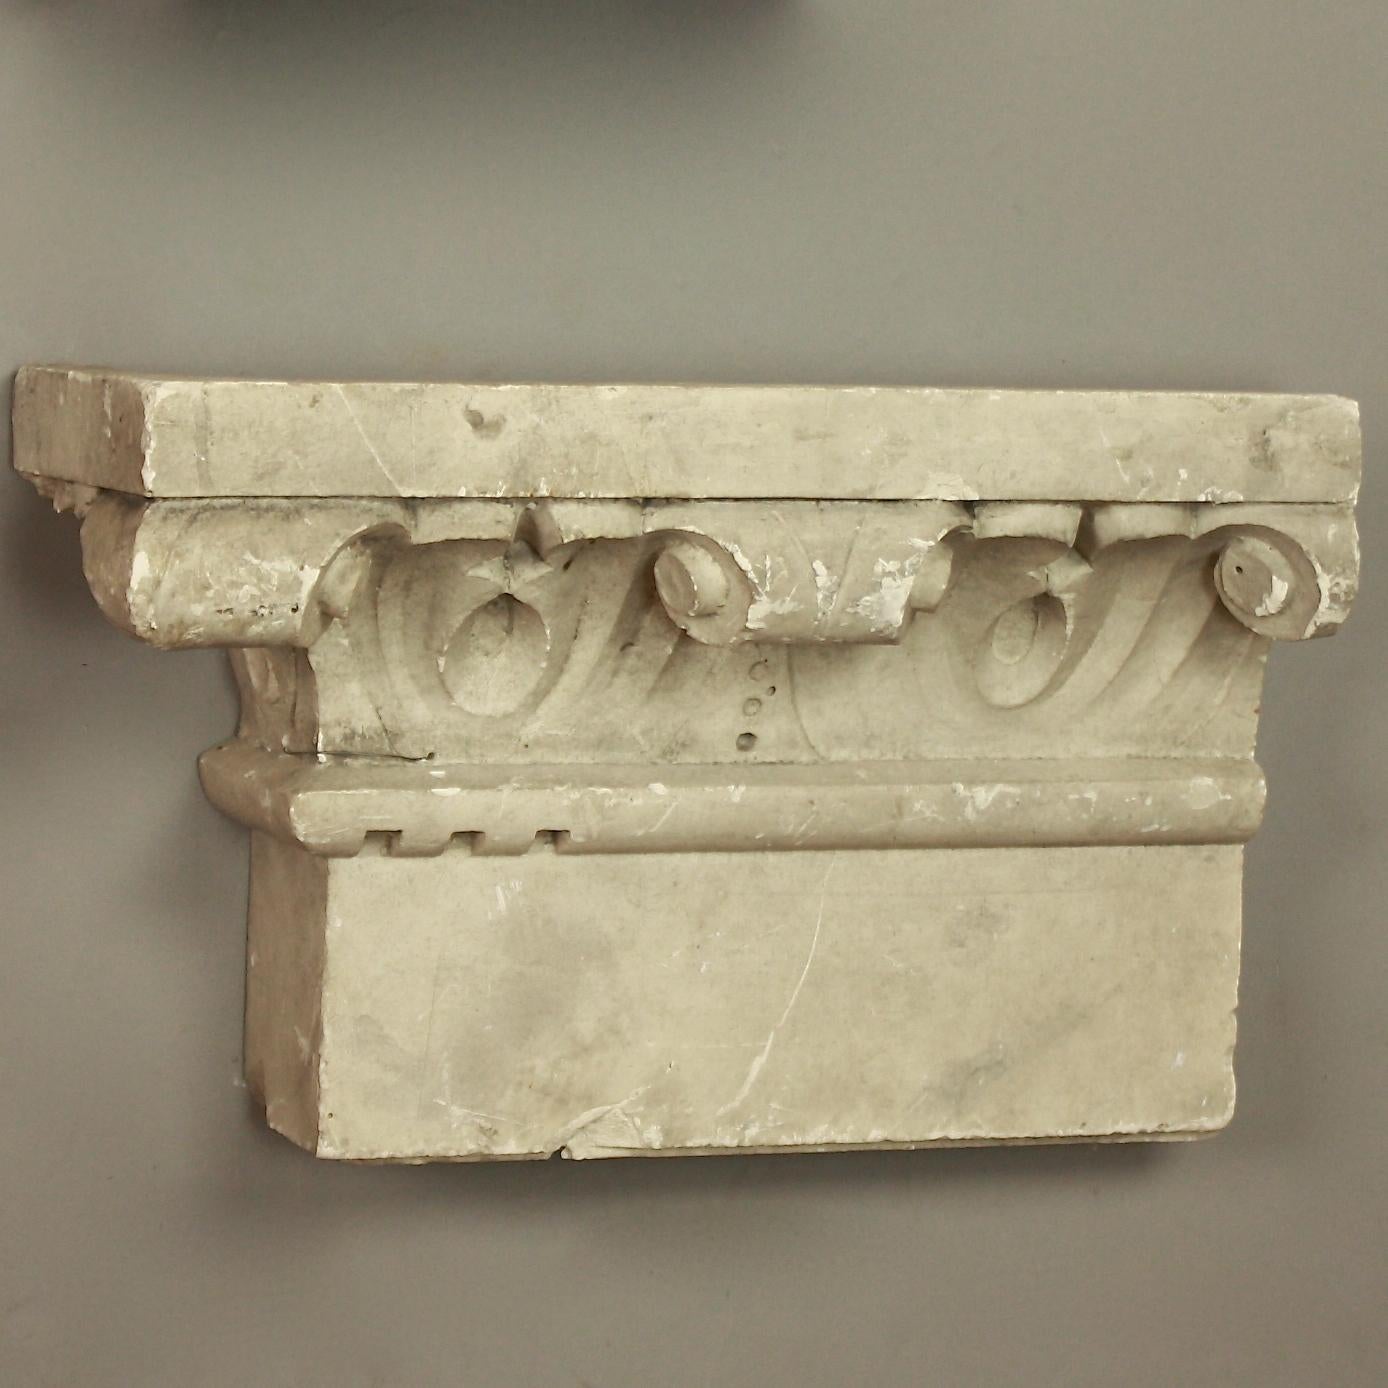 Grand Tour Collection of 19th Century Plaster Casts of Architectural Elements